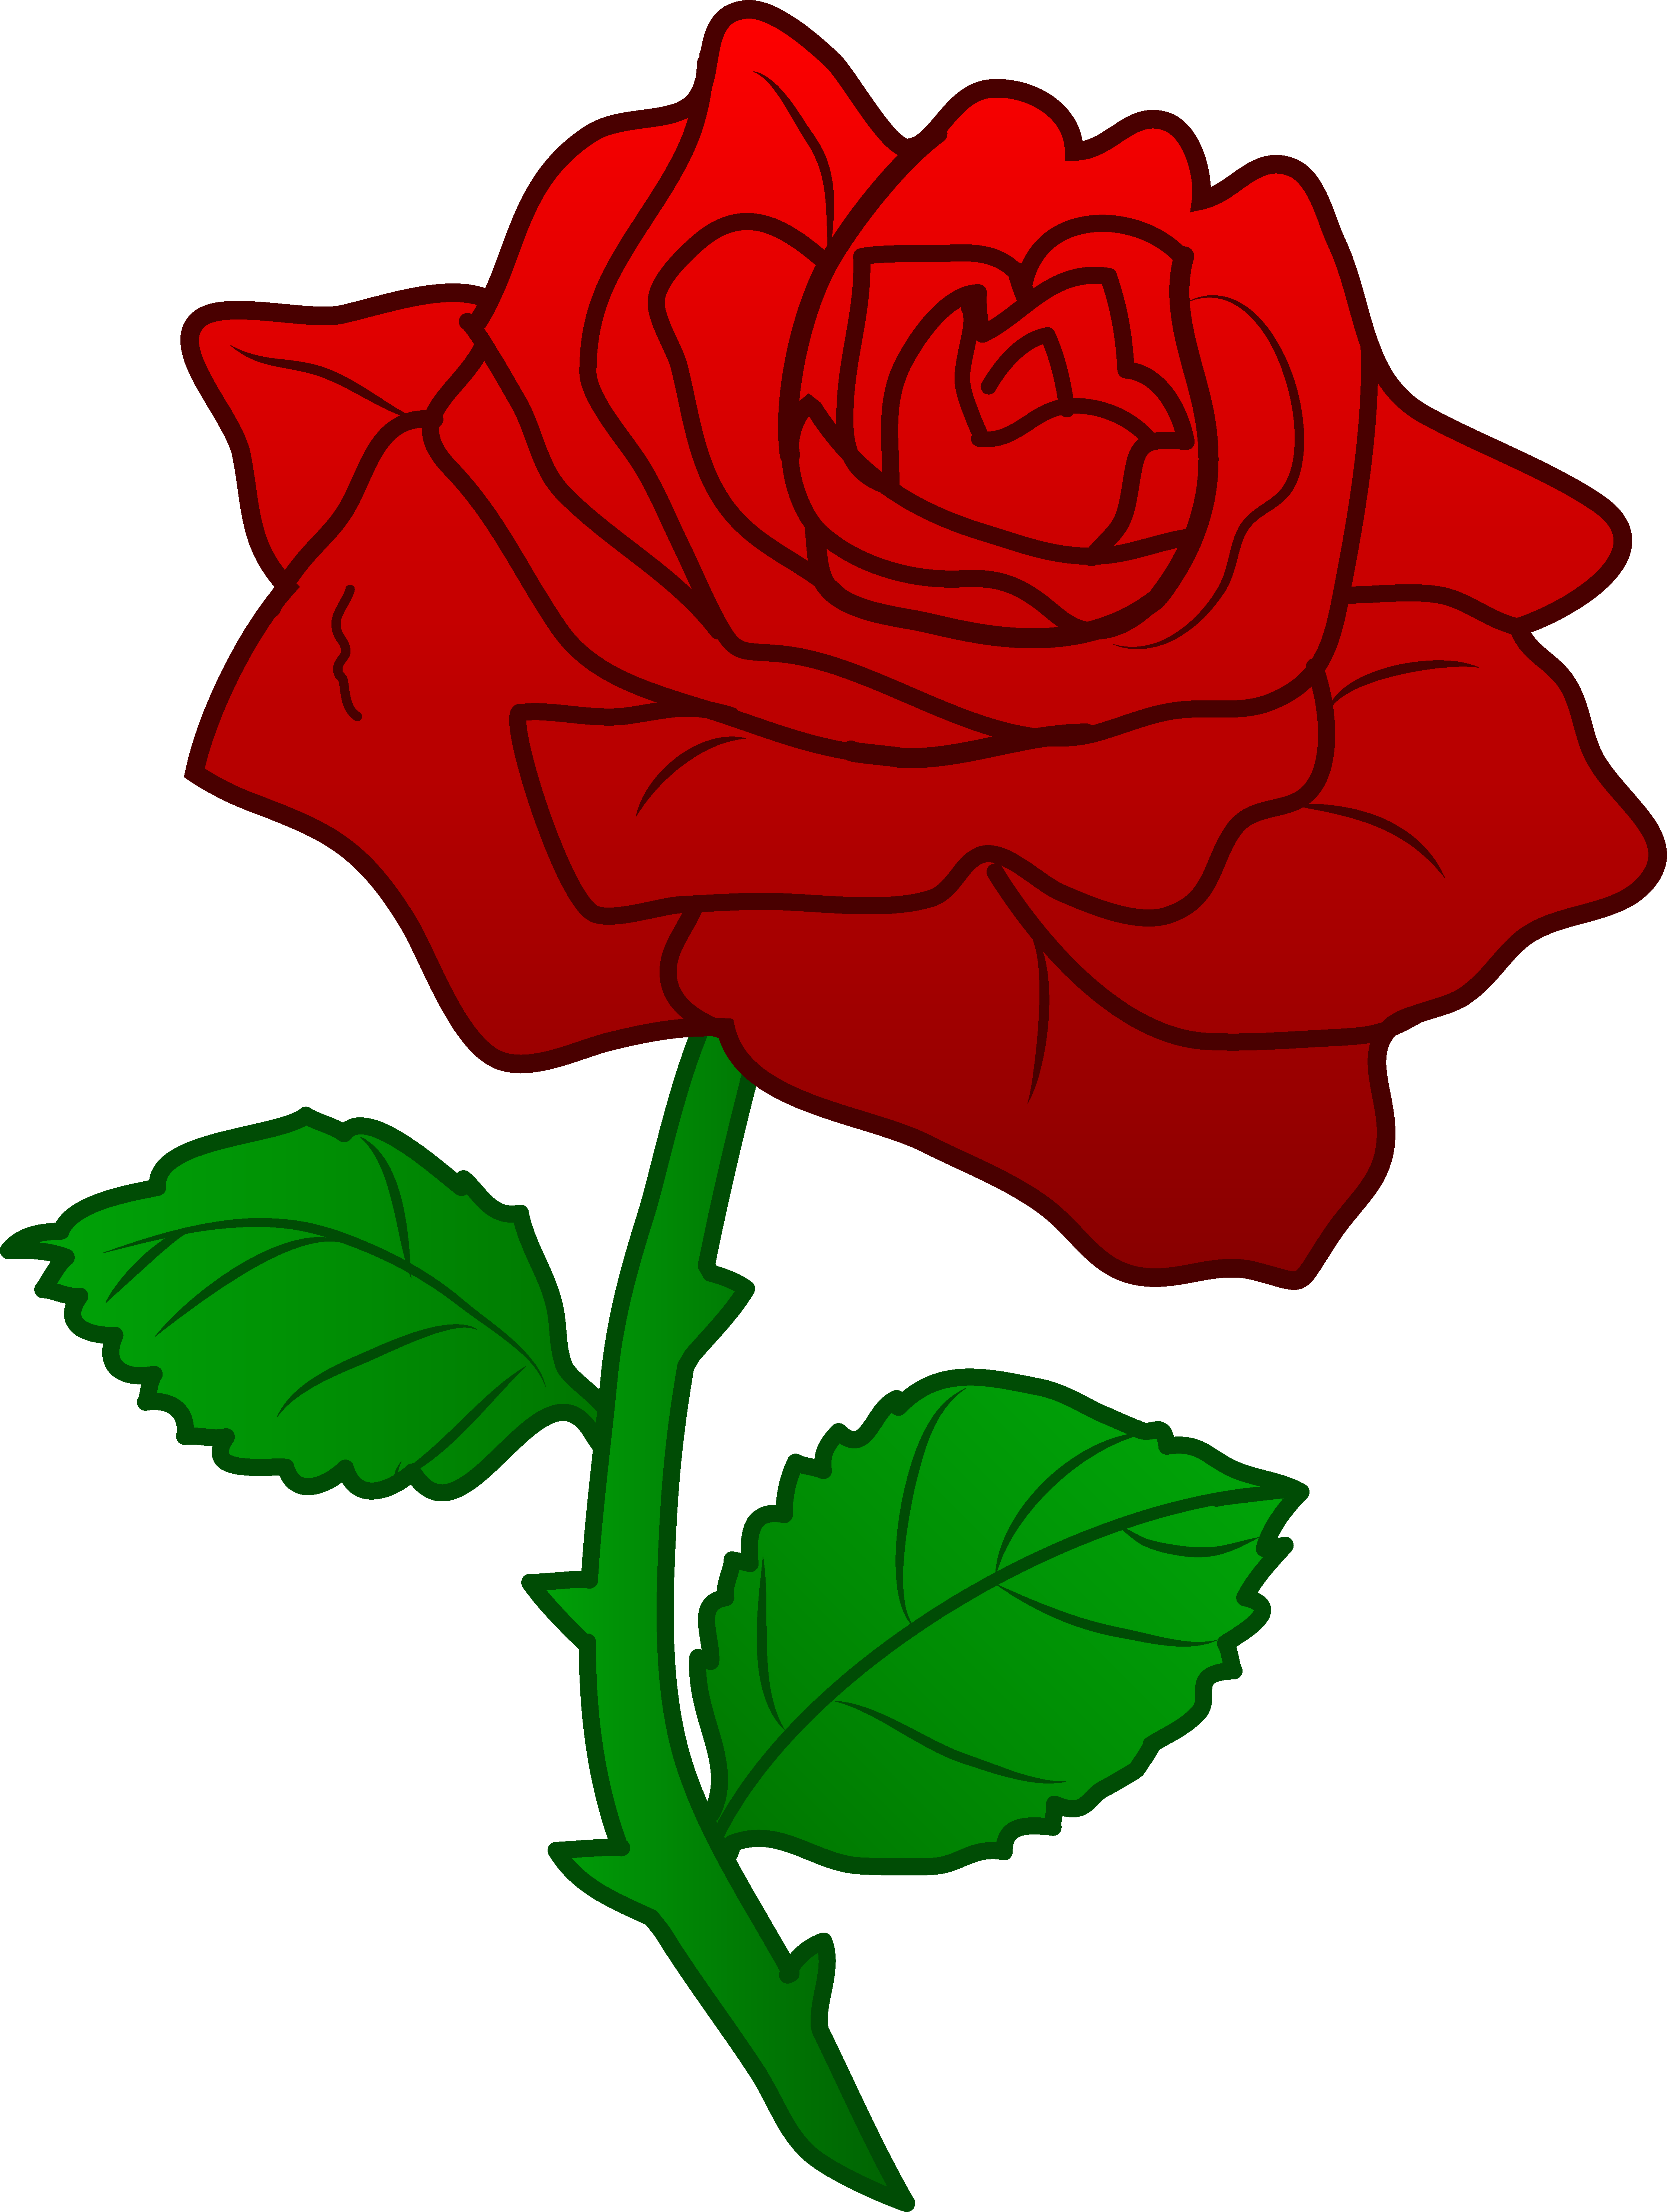 Free Cartoon Roses Pictures, Download Free Cartoon Roses Pictures png images, Free ClipArts on